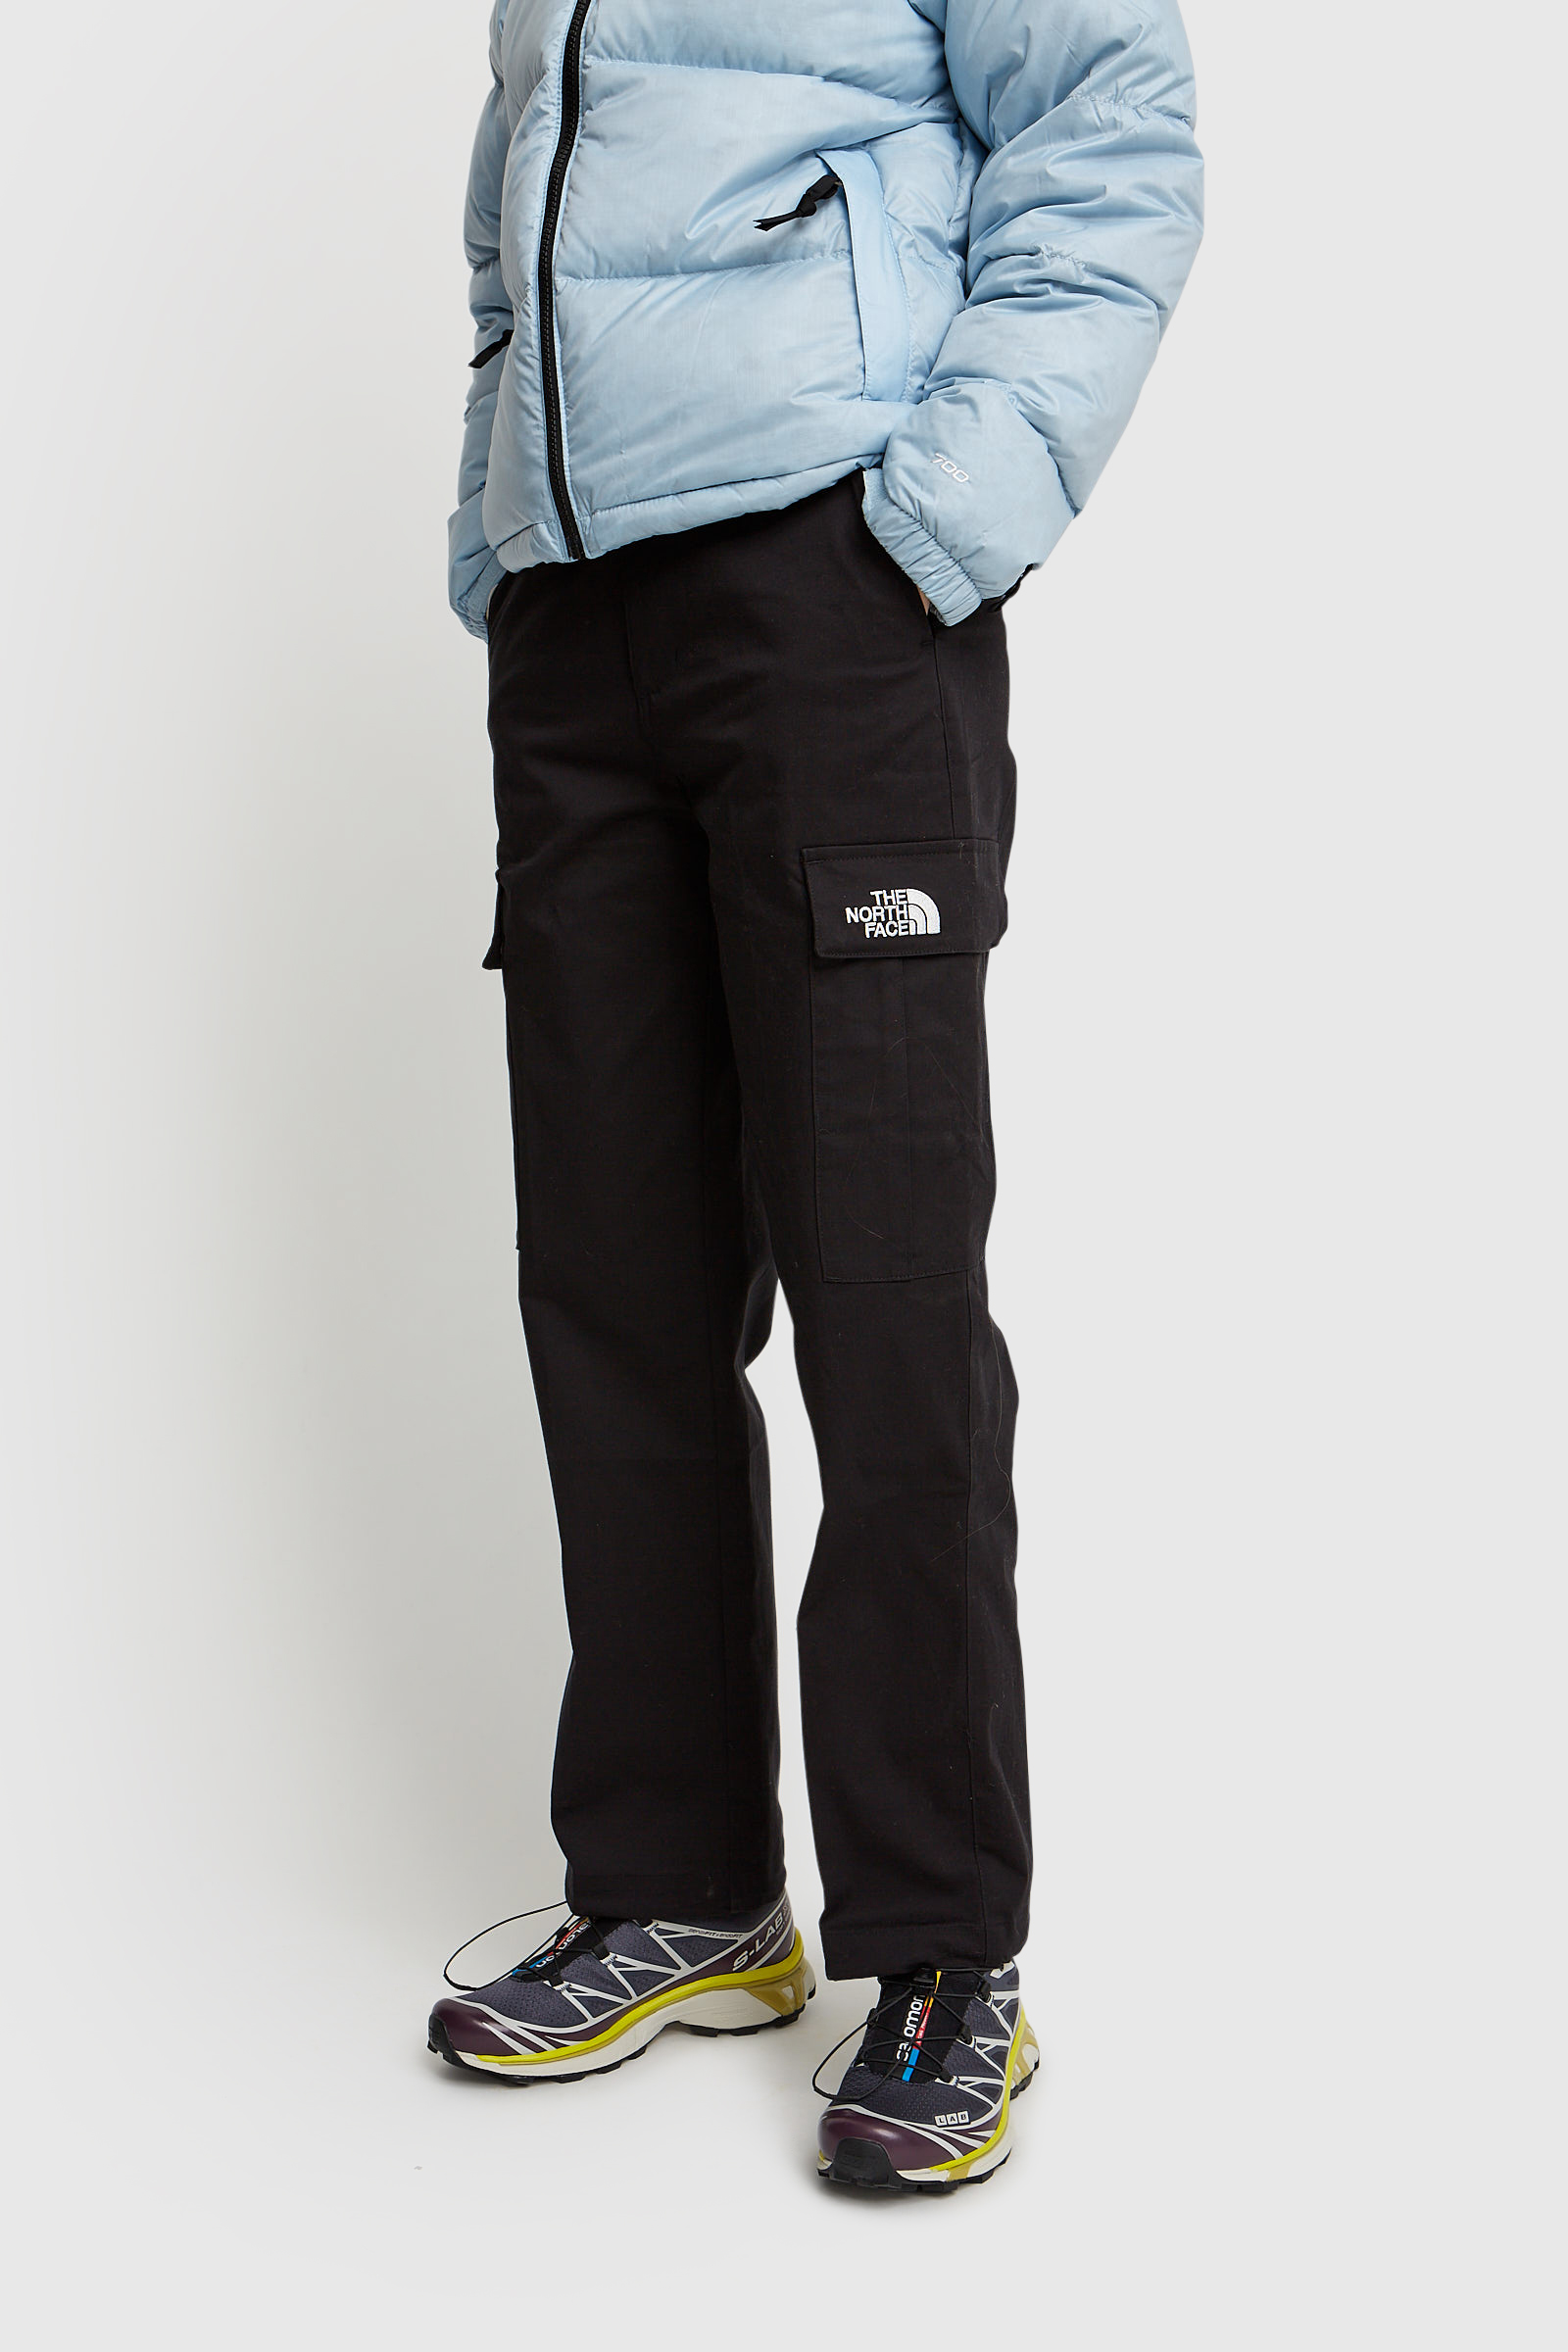 north face cargo pants